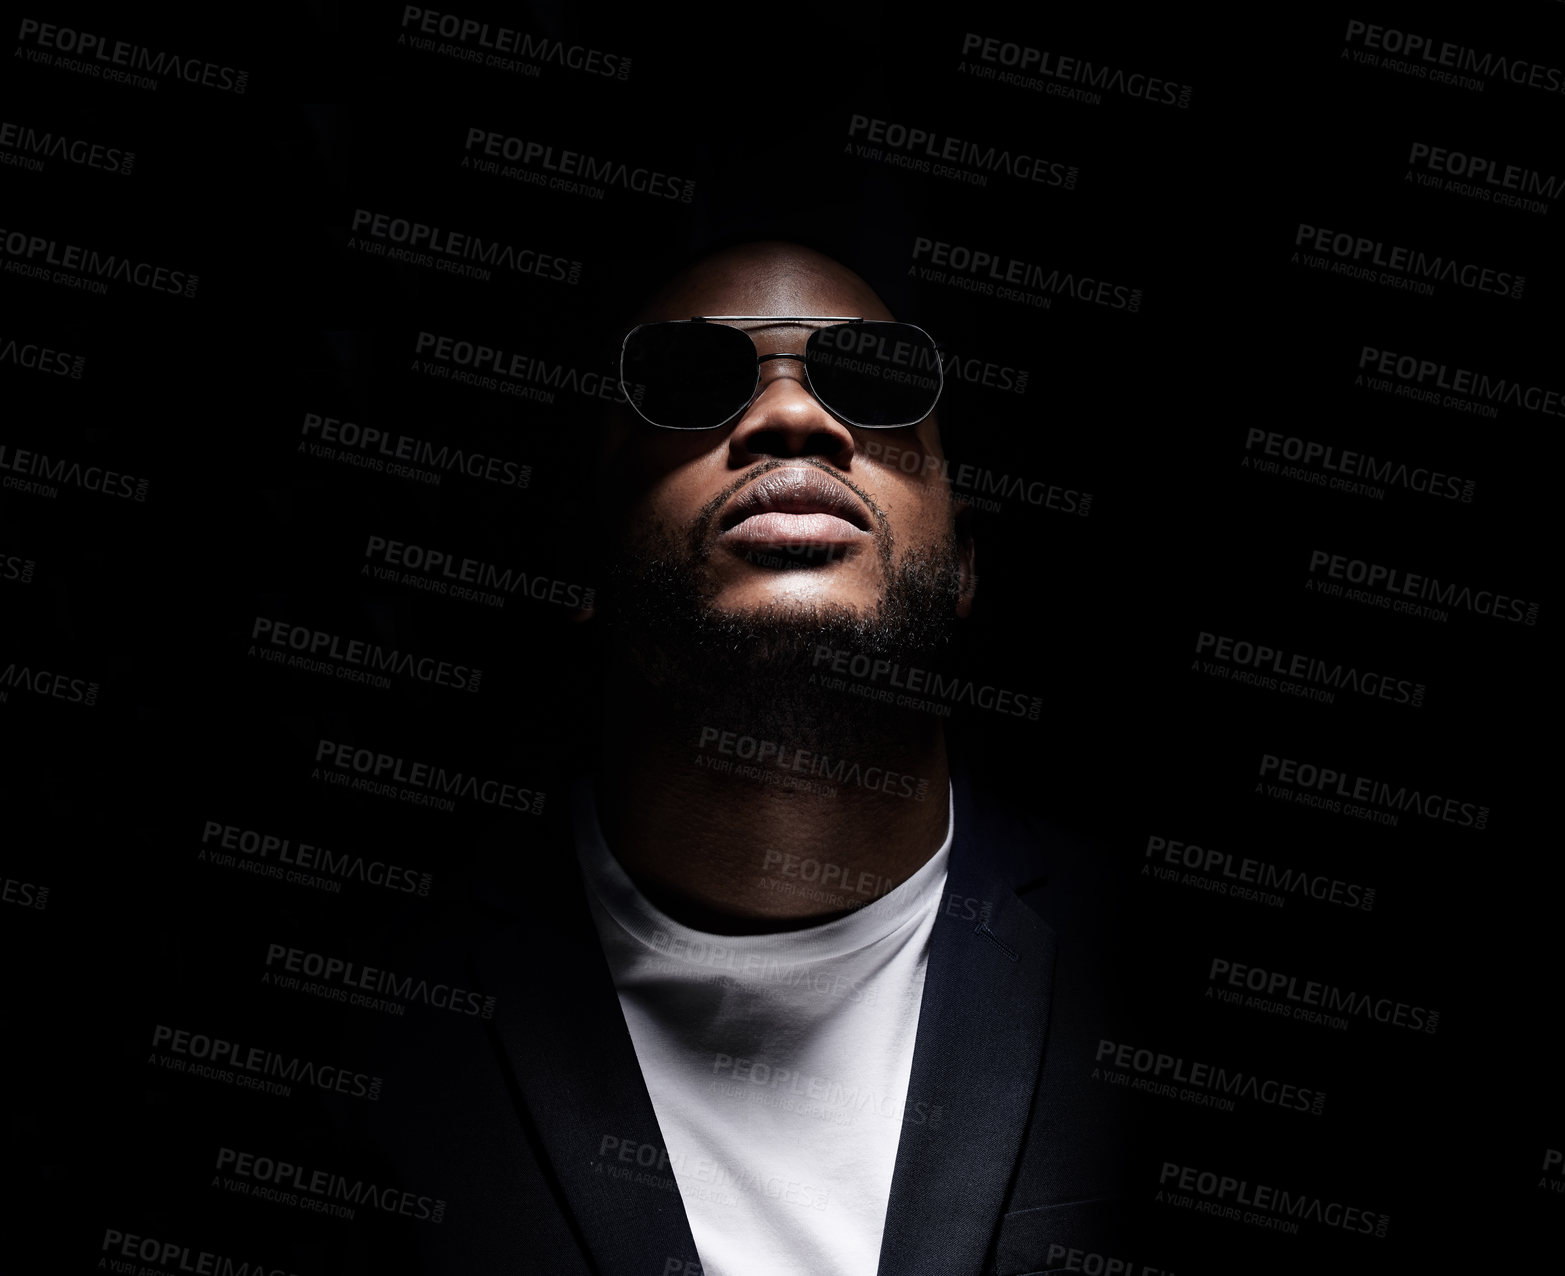 Buy stock photo Studio shot of a man wearing sunglasses while posing against a dark background